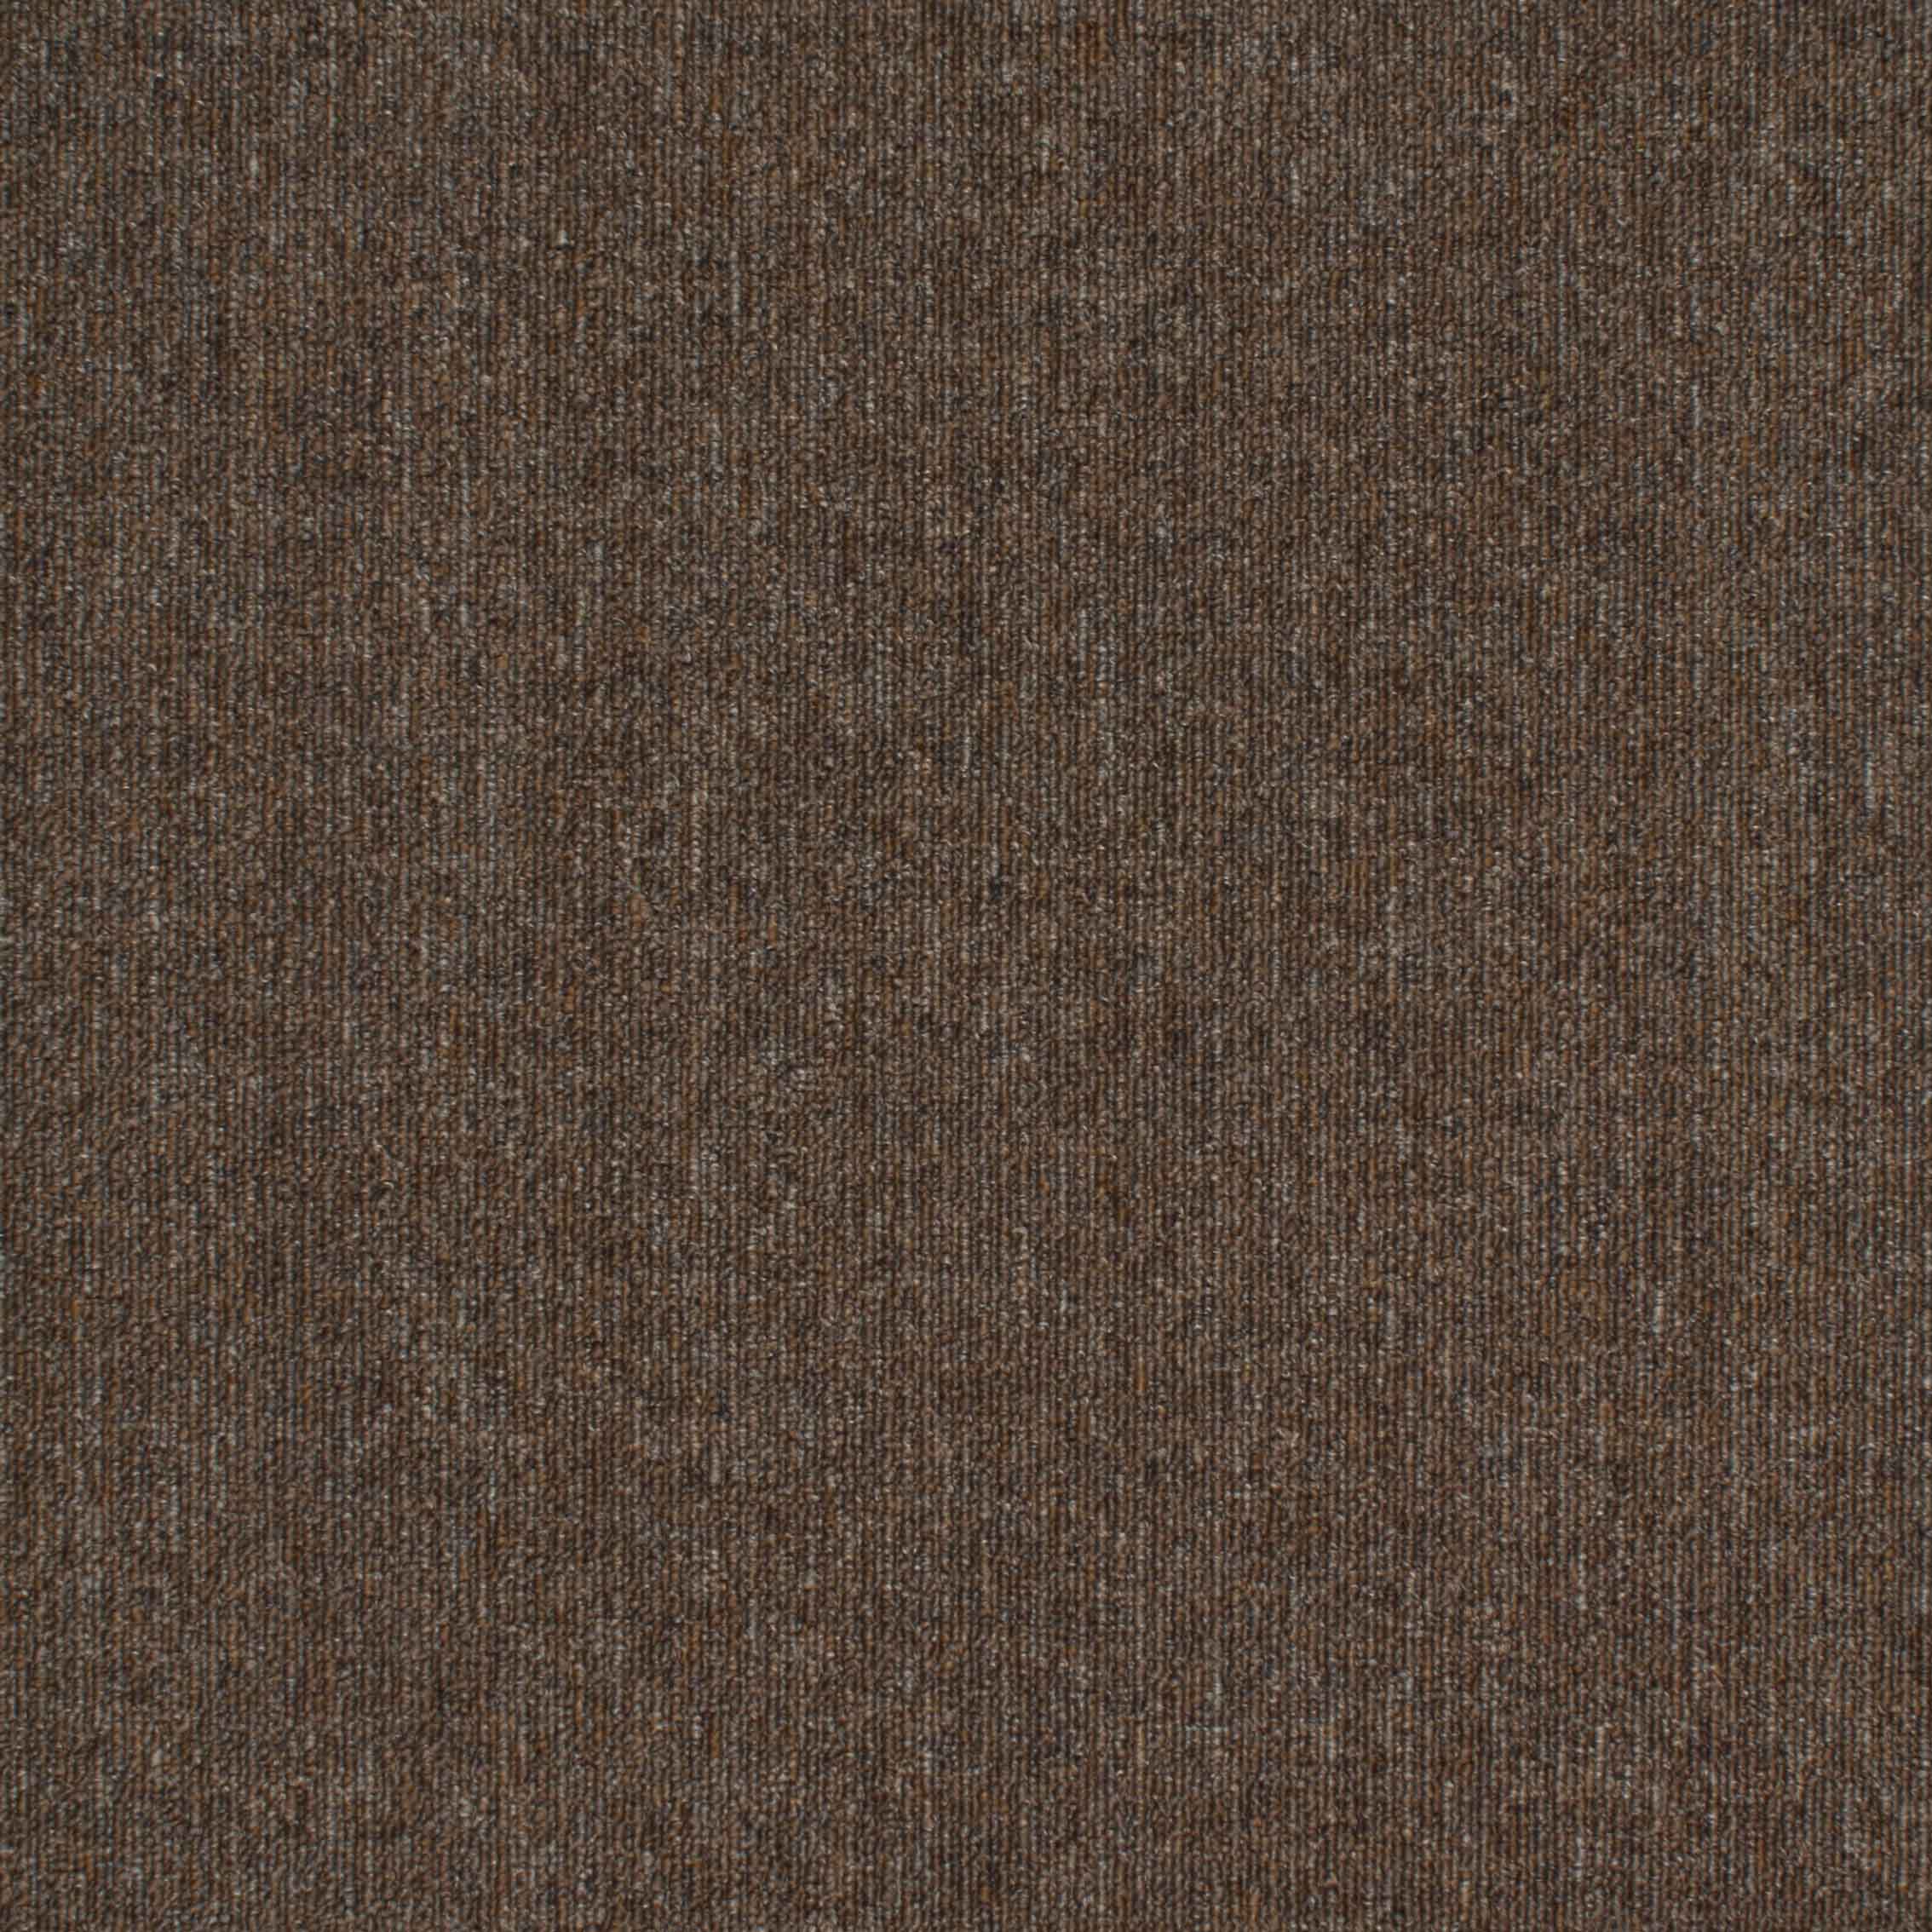 TACK996 Customized Commercial Library Carpet Tiles Factory